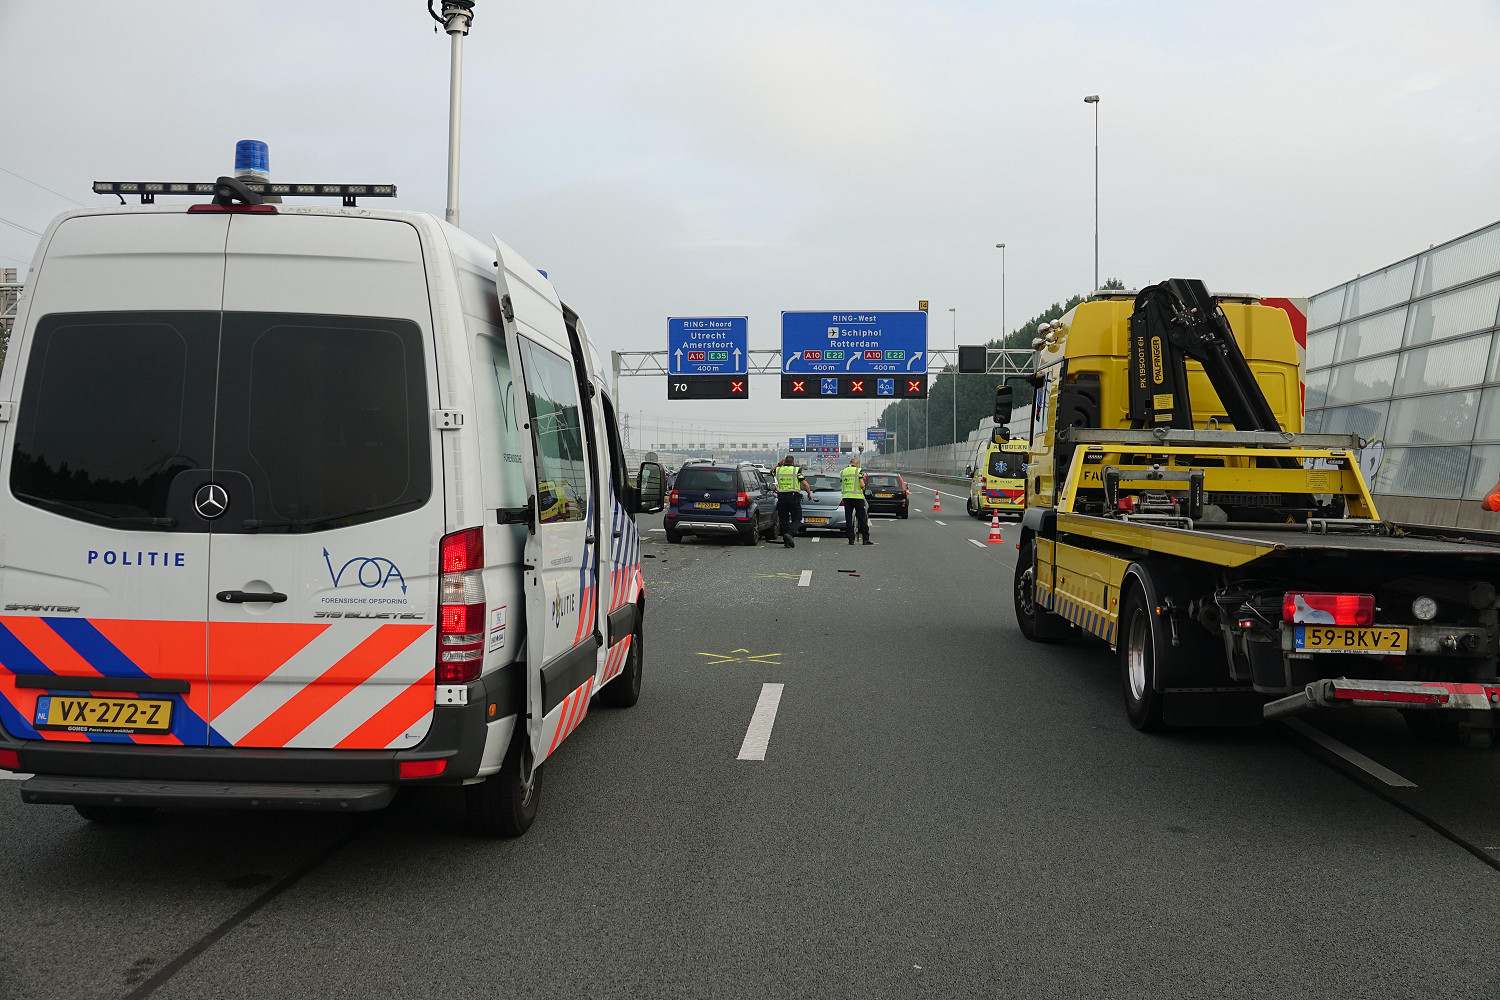 Following an accident on the A10, on 25 September 2021, Hoogwout Berging awaits completion of the police's on-scene investigations